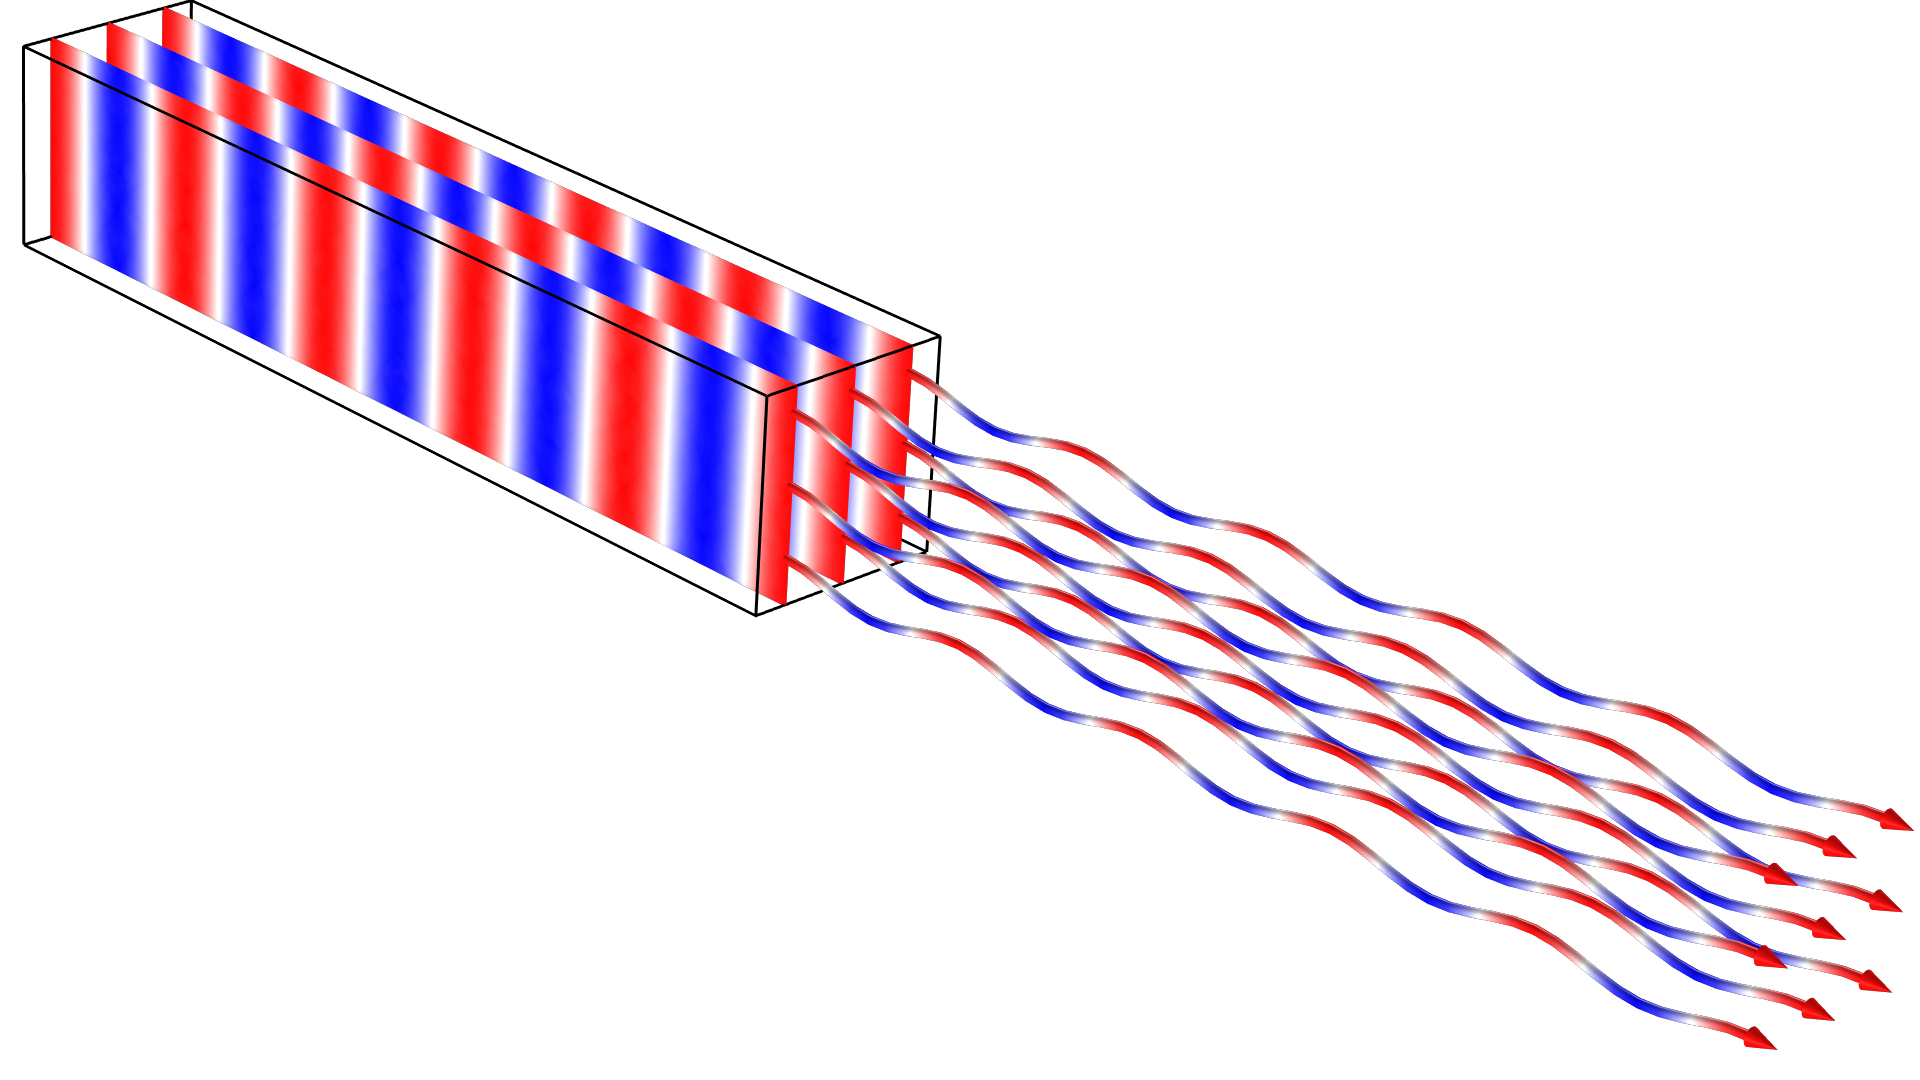 For ray tracing, rays can be released based on the electric field on a boundary.